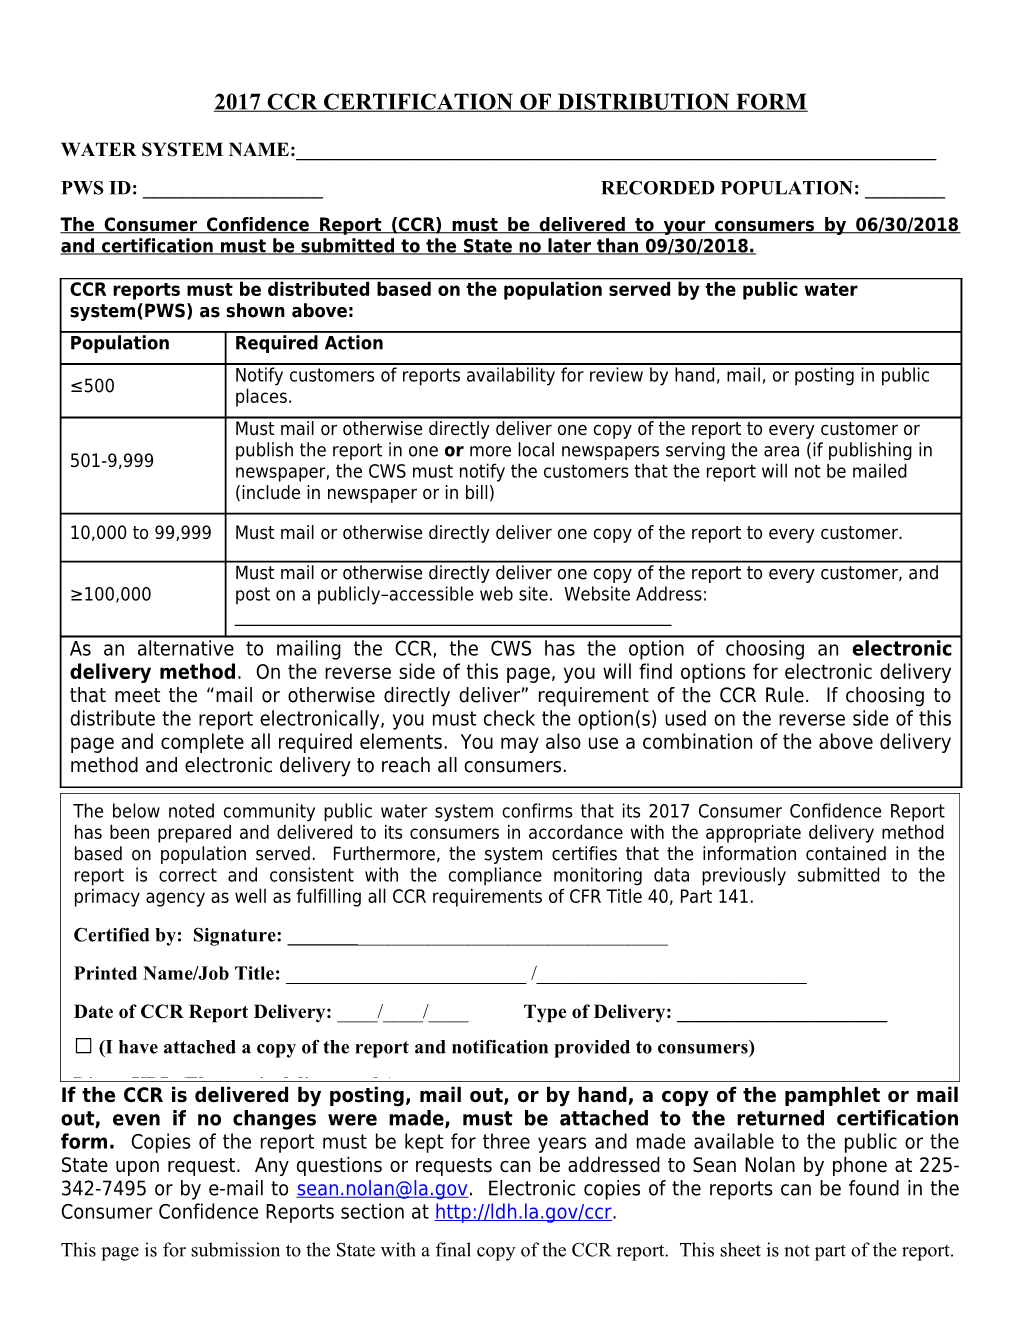 2017 Ccr Certification of Distribution Form